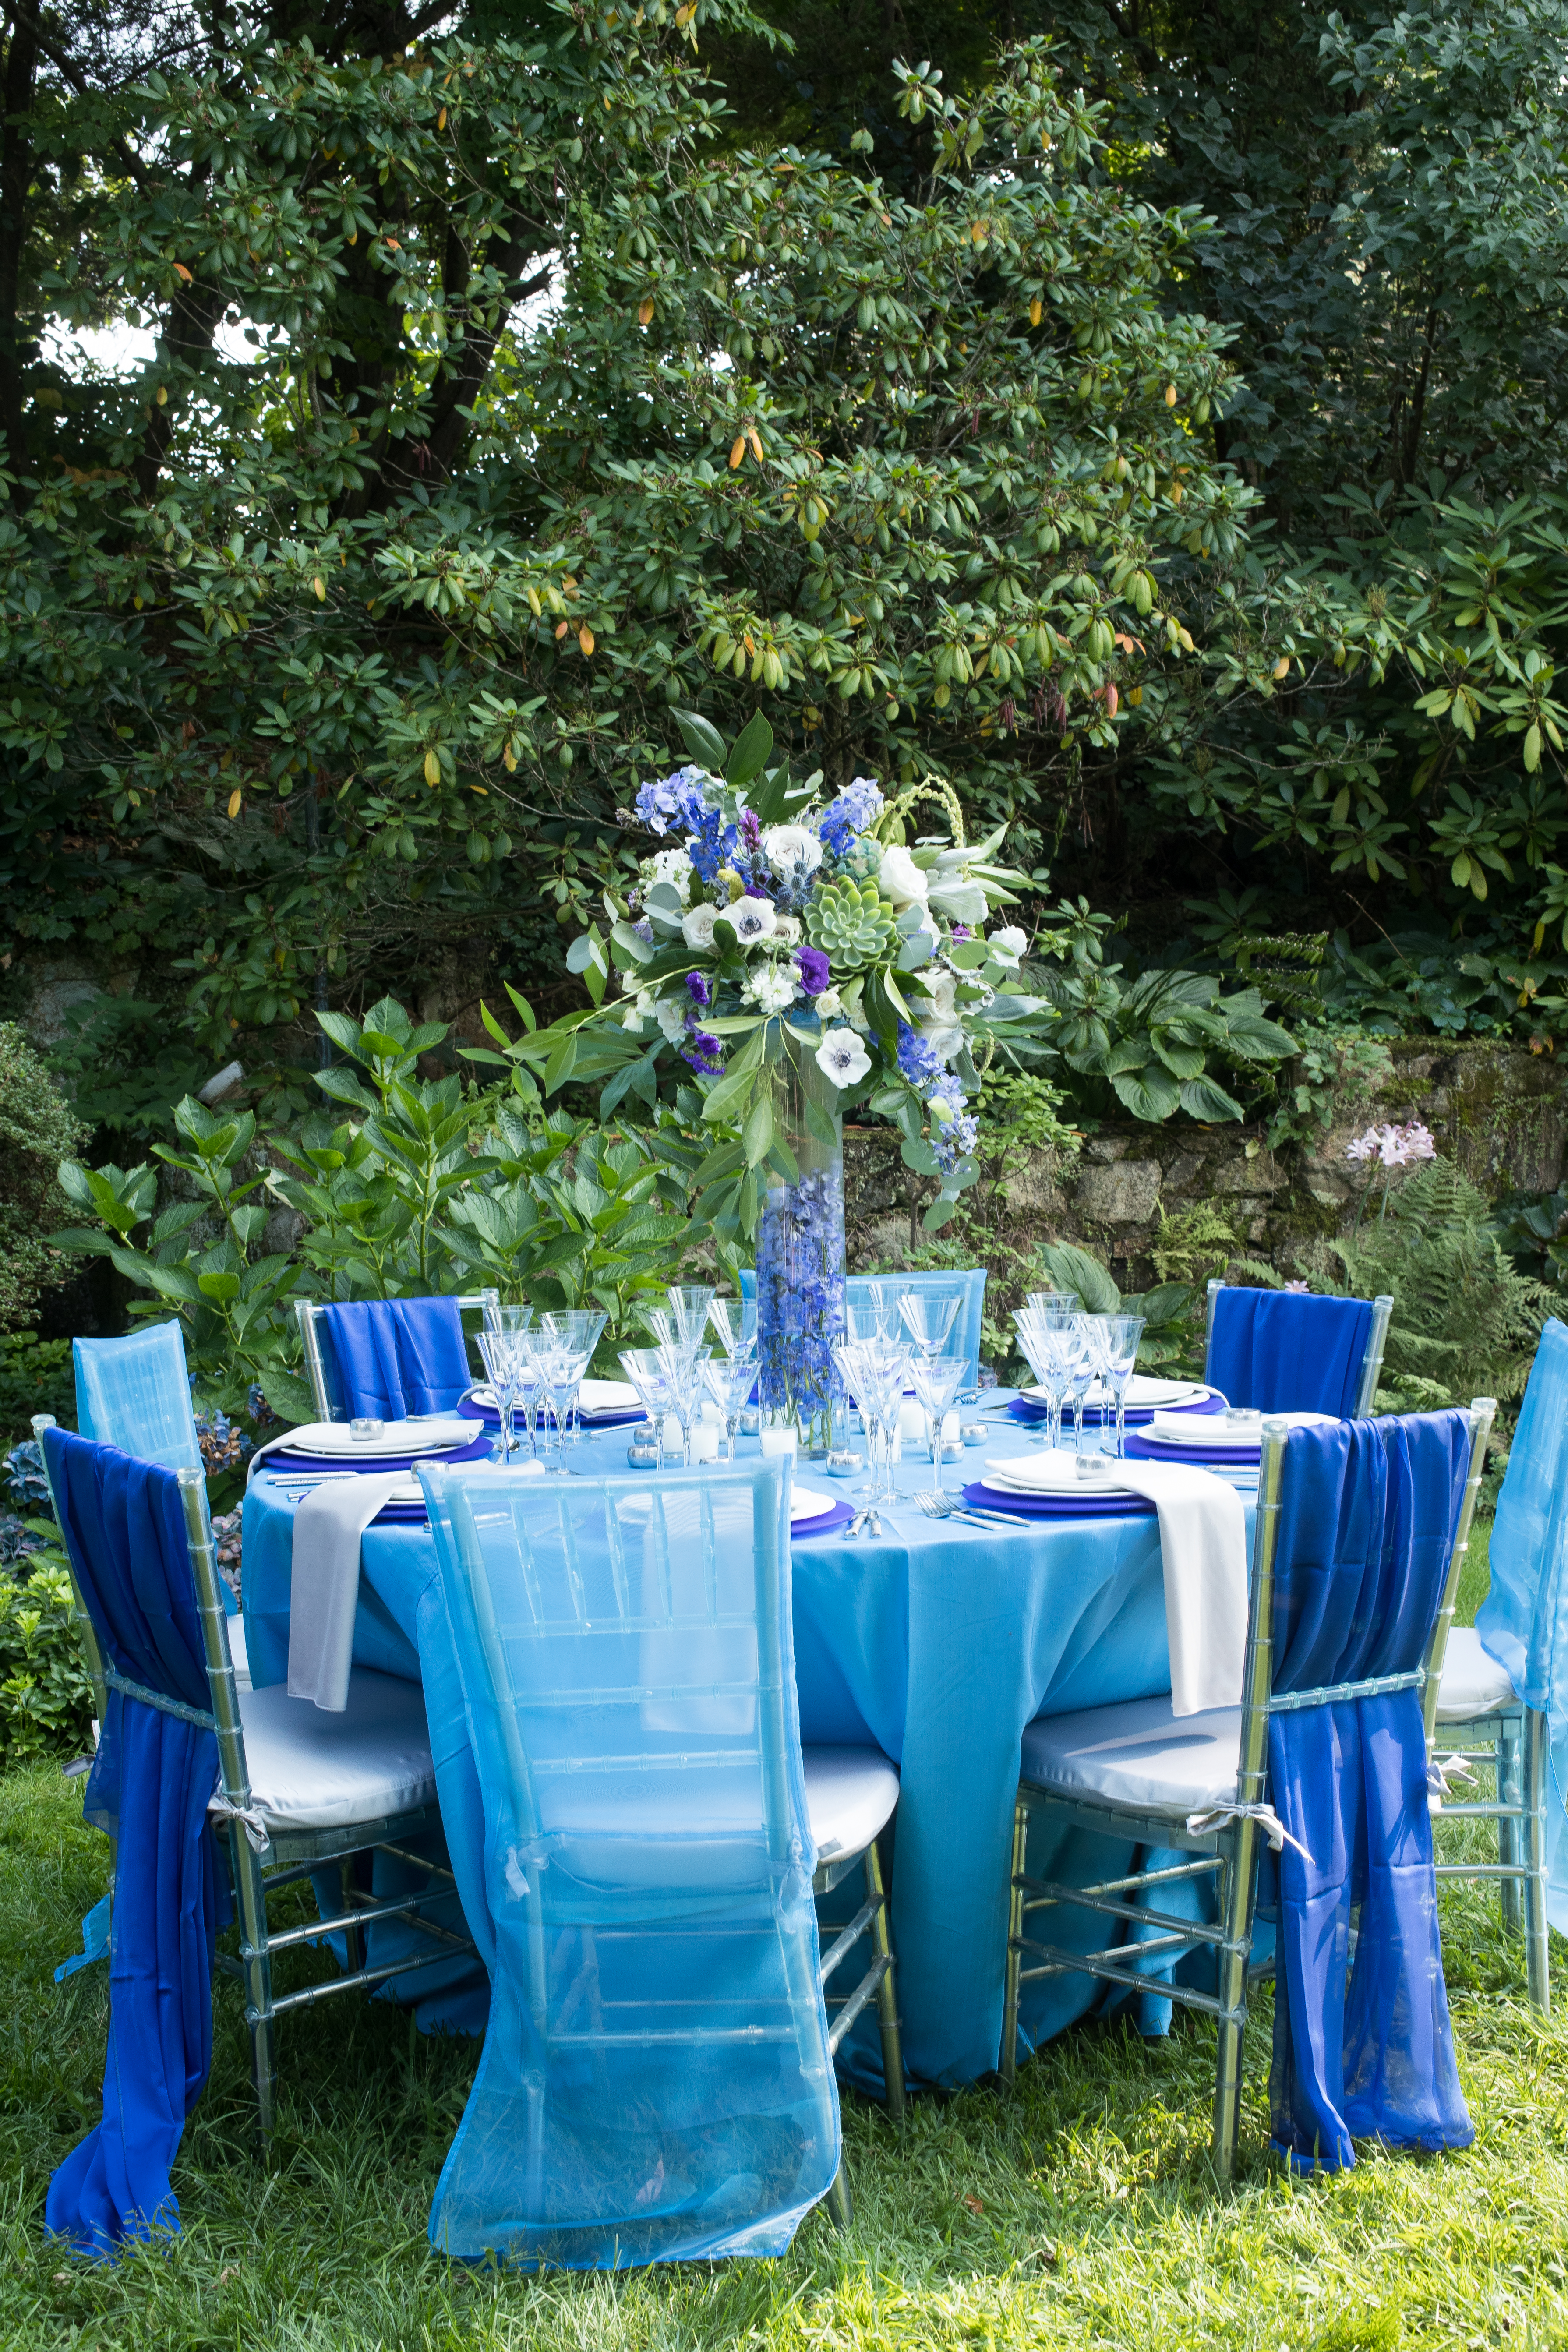 This gorgeous combination of blues and purples is perfect for a garden wedding. Read the blog to get more inspiration and download the free venue guide to find the best place for your wedding!